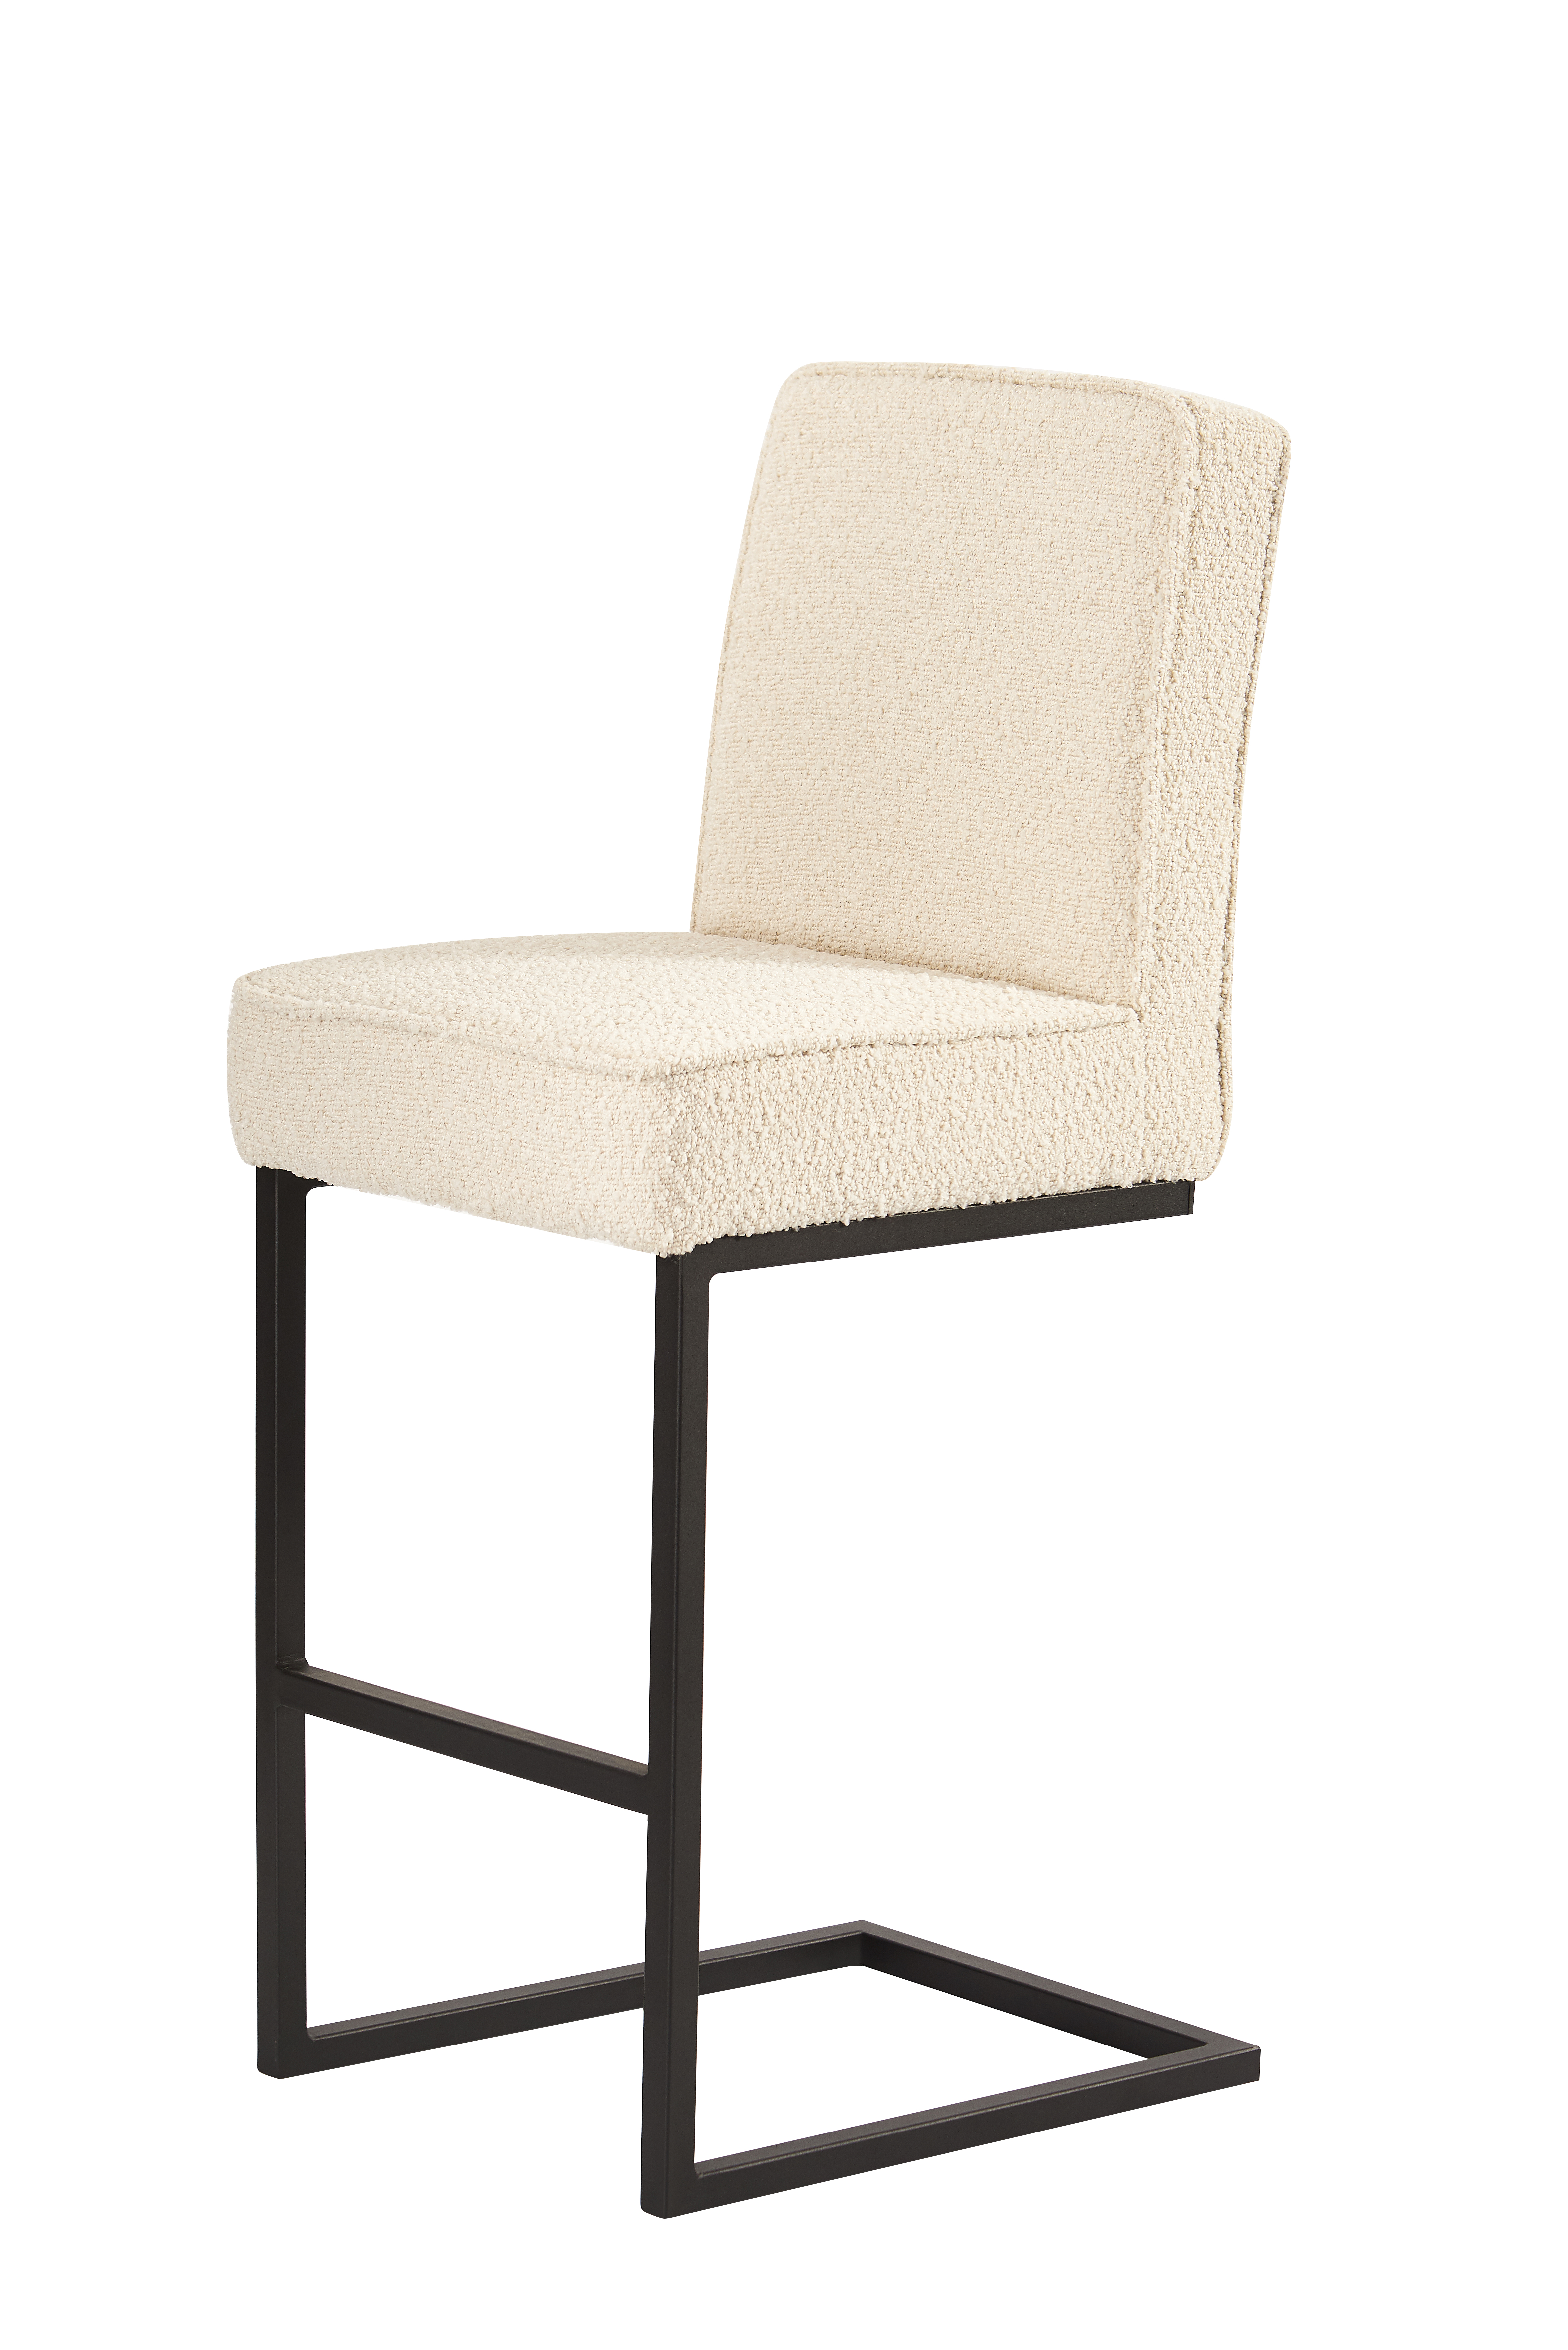 Tips For Buying a Bar Stool